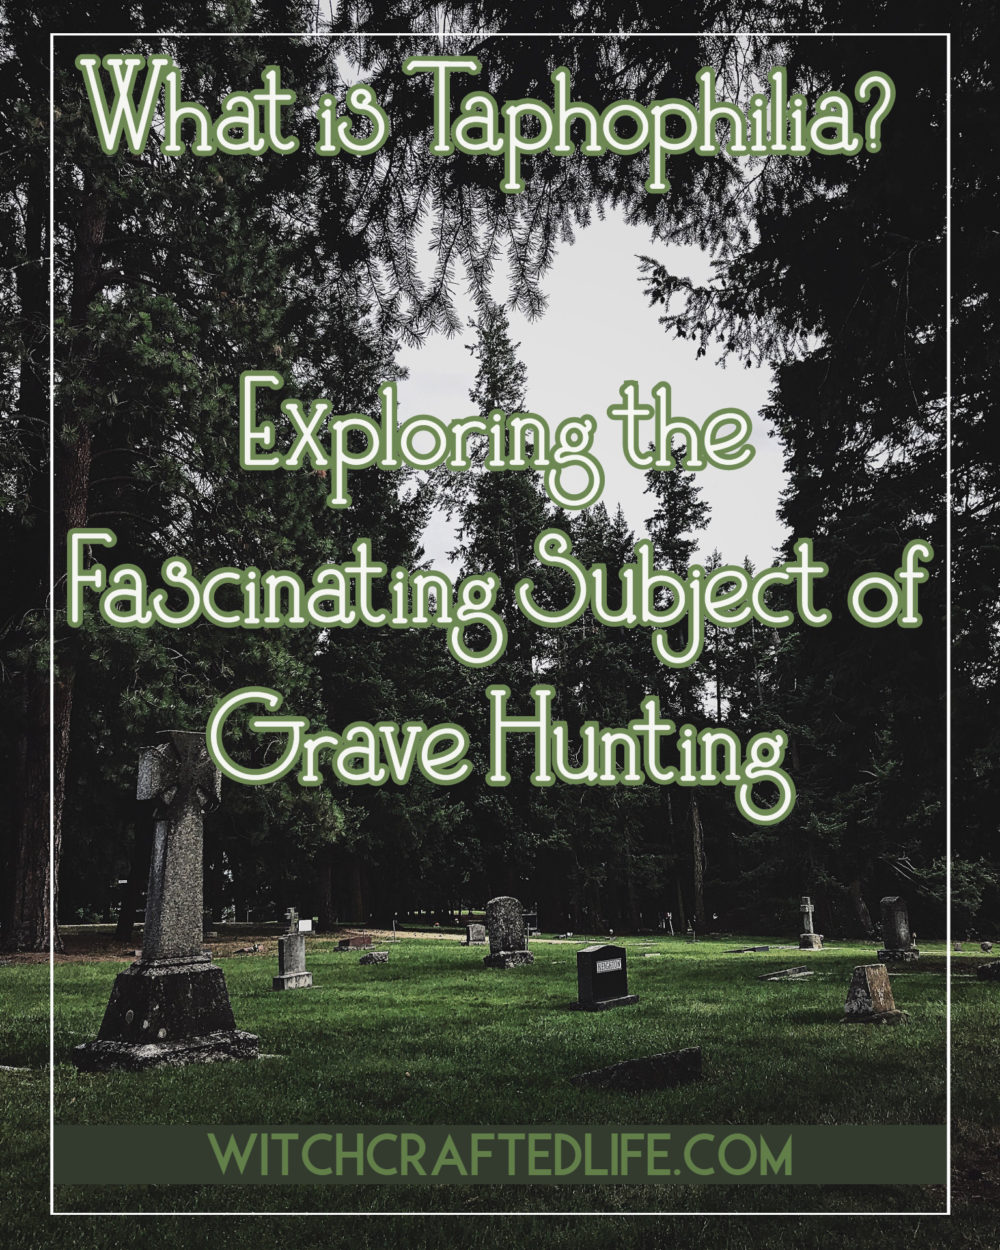 What is Taphophilia? Exploring the Fascinating Subject of Grave Hunting